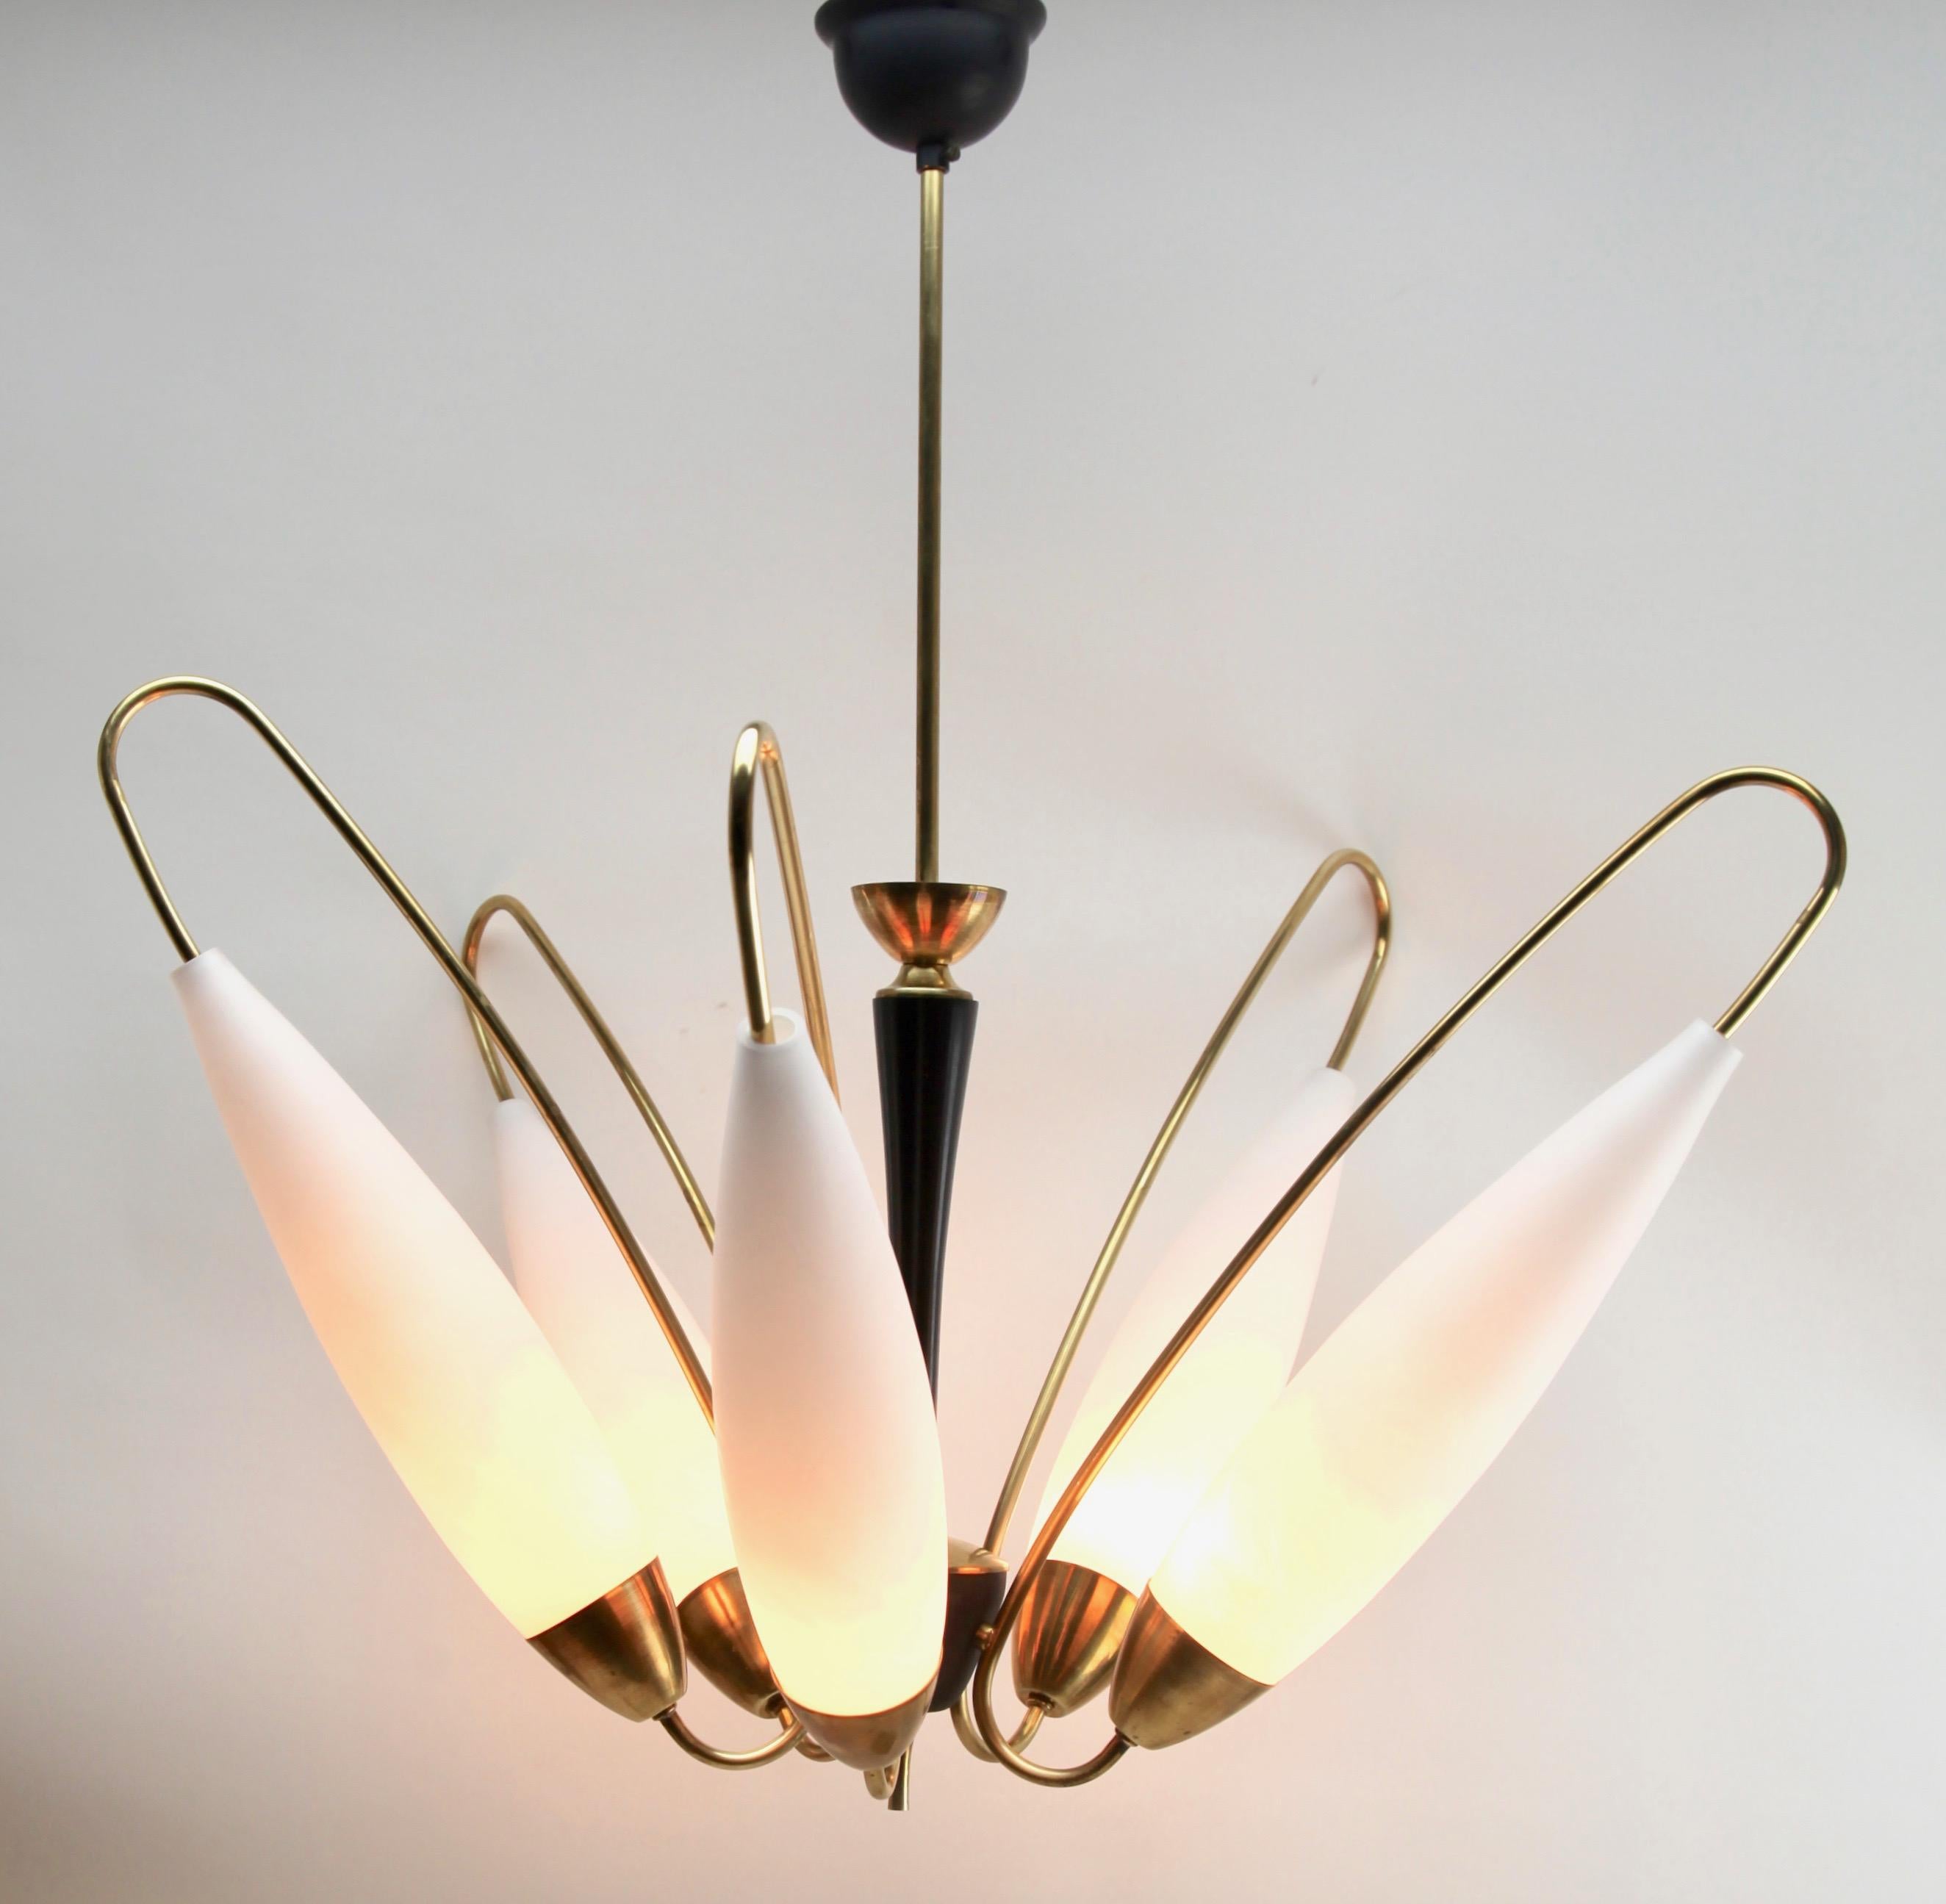 Mid-20th Century Vintage Chandelier in the Style of Stilnovo Five Arms, Italian, 1960s